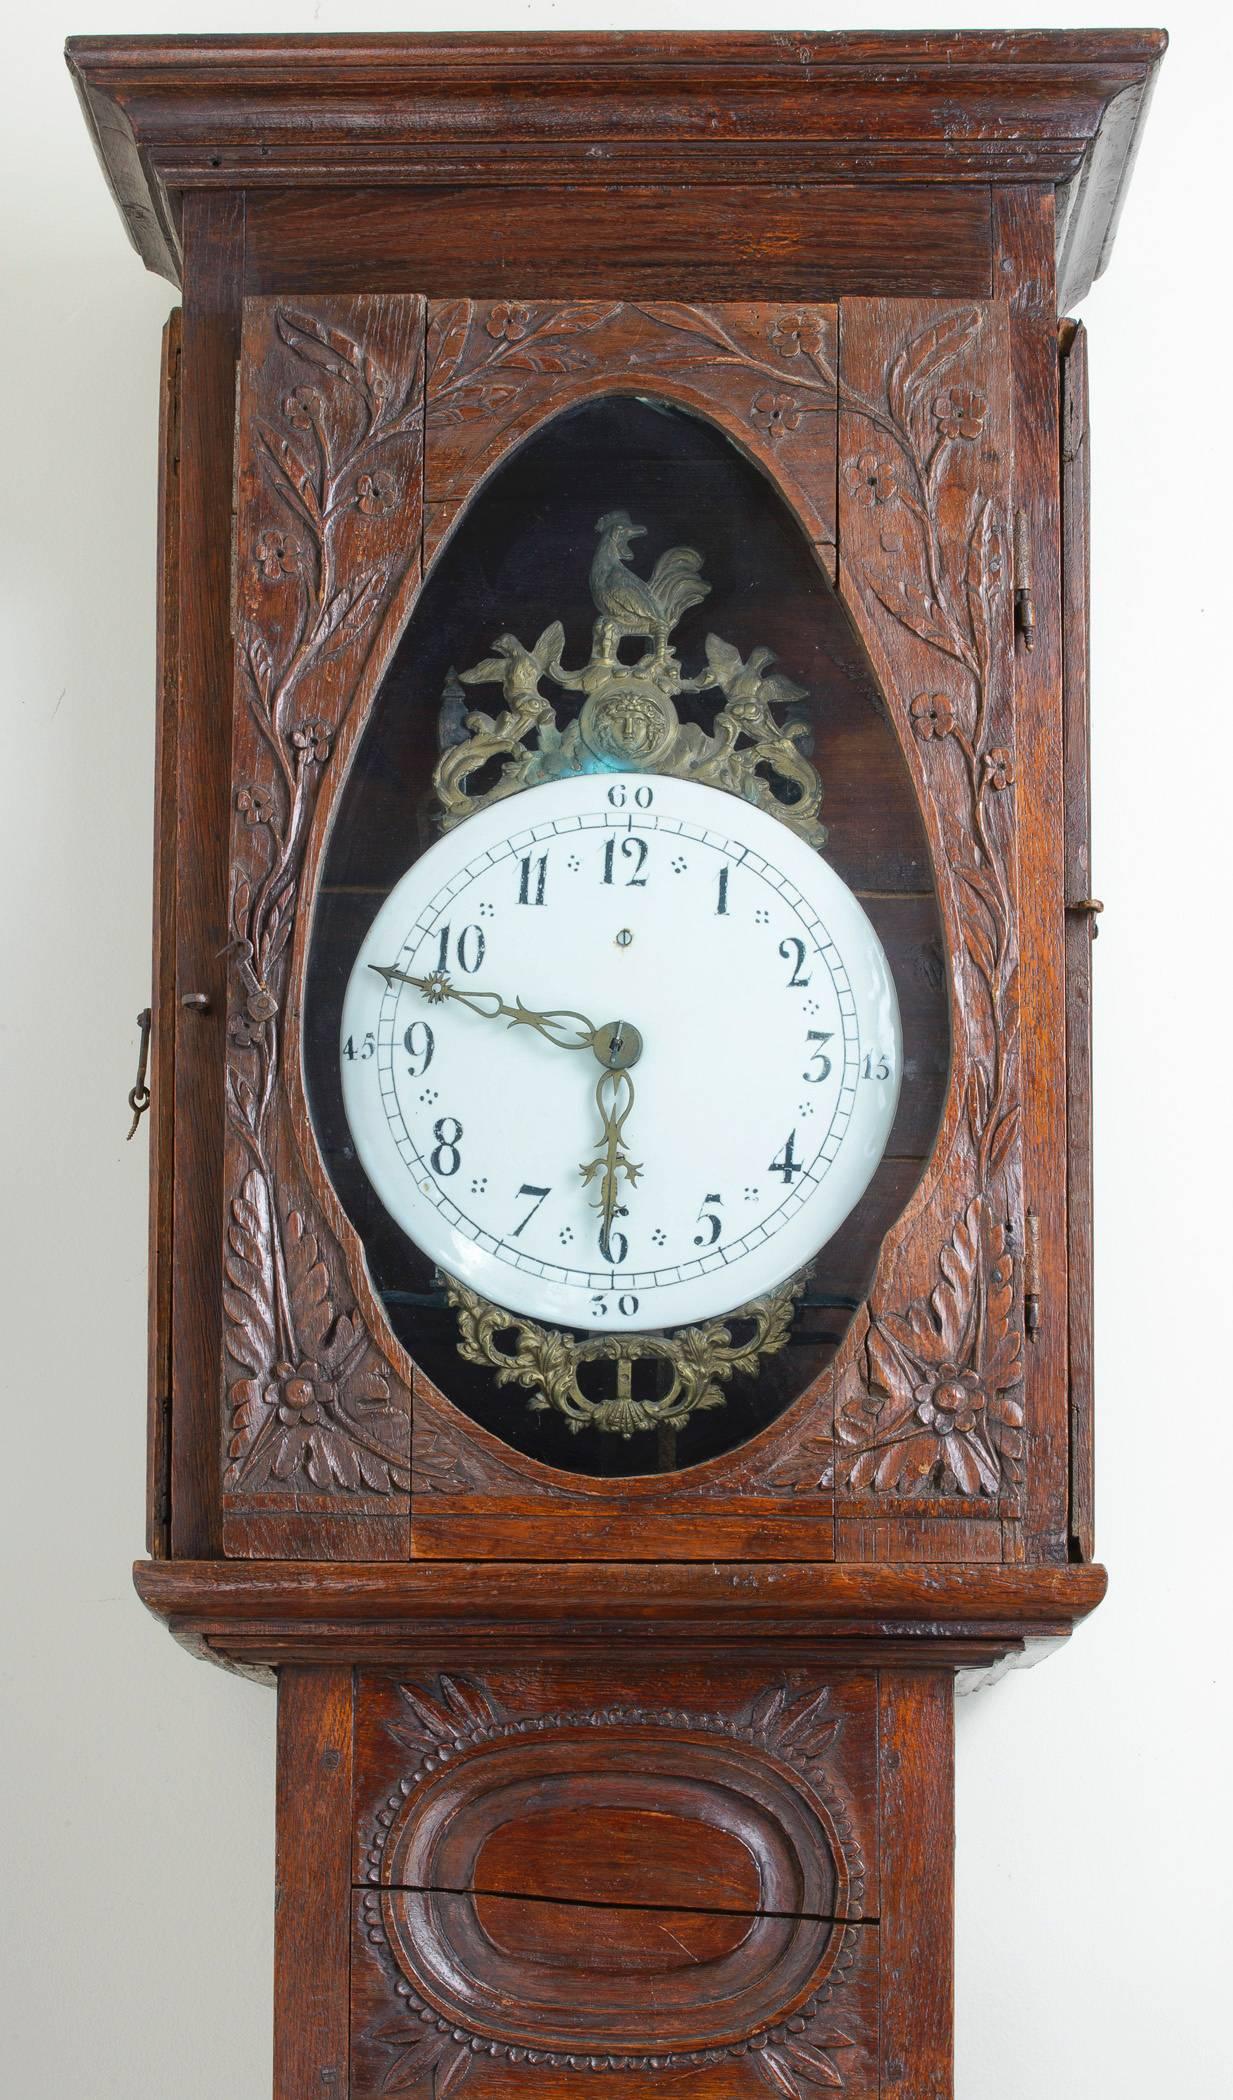 The oak case is heavily carved with edelweiss flowers, branches and berries.  The enamel clock face is hand-painted and indicates the hours, minutes and quarter hour. 
The clock face surround has a wonderful crowing rooster atop, joined with birds